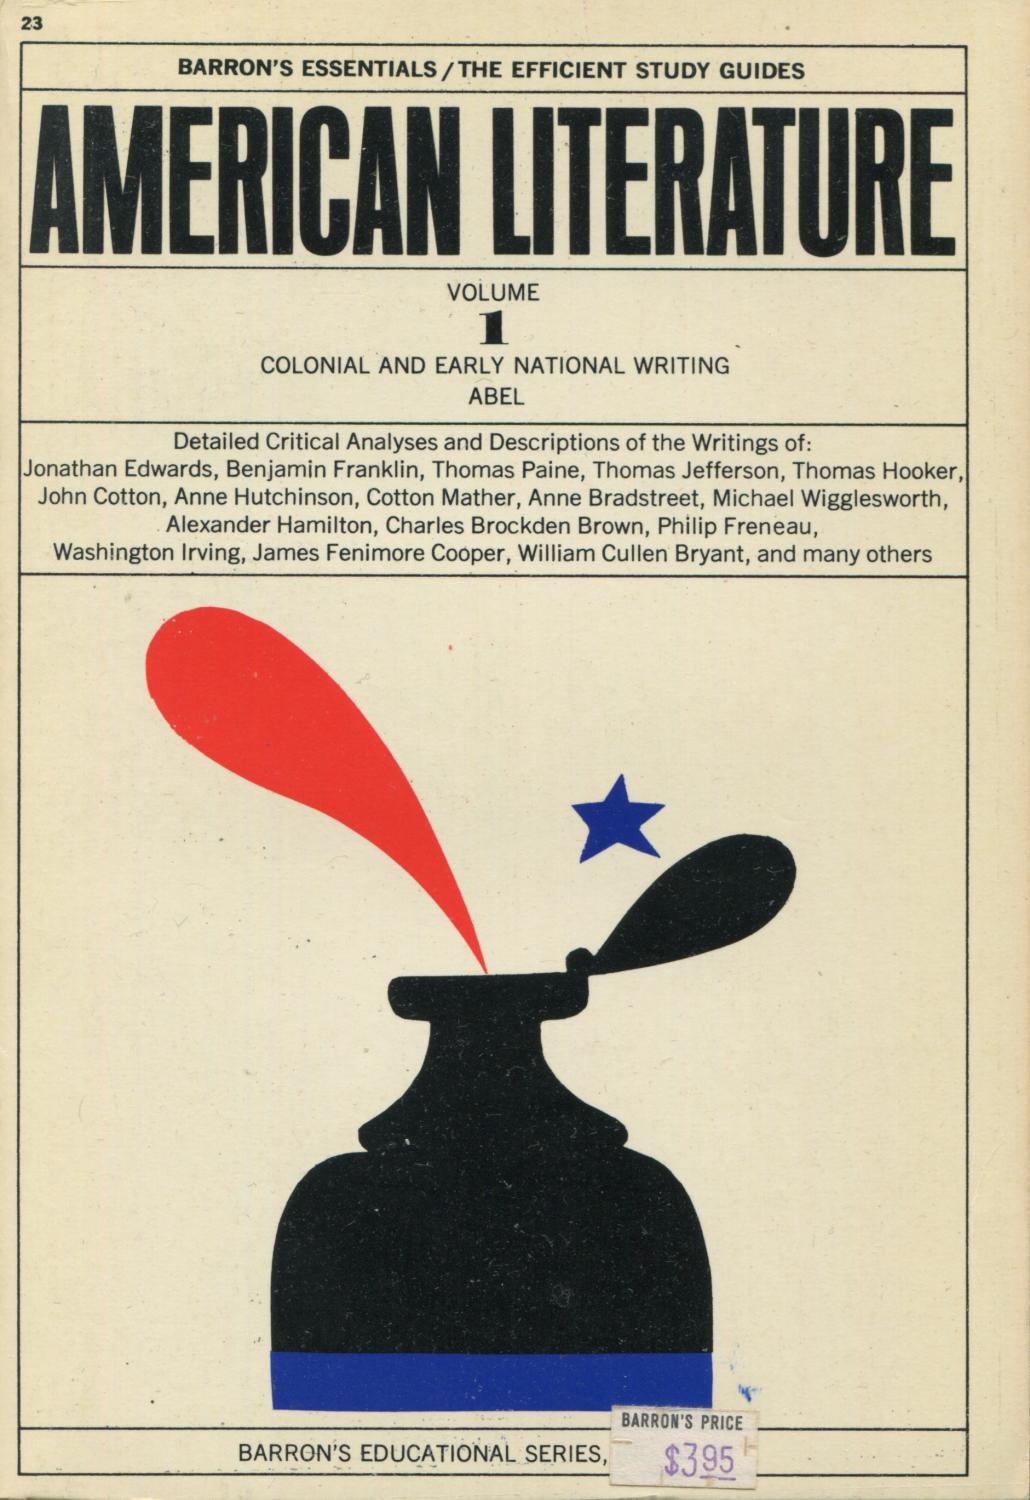 Very　Early　and　Writing　American　1:　Abel,　of　Good　A.　Edition　Literature,　by　(1963)　Later　National　Soft　Kenneth　Volume　Colonial　Printing　Softcover　Darrel:　cover　Himber